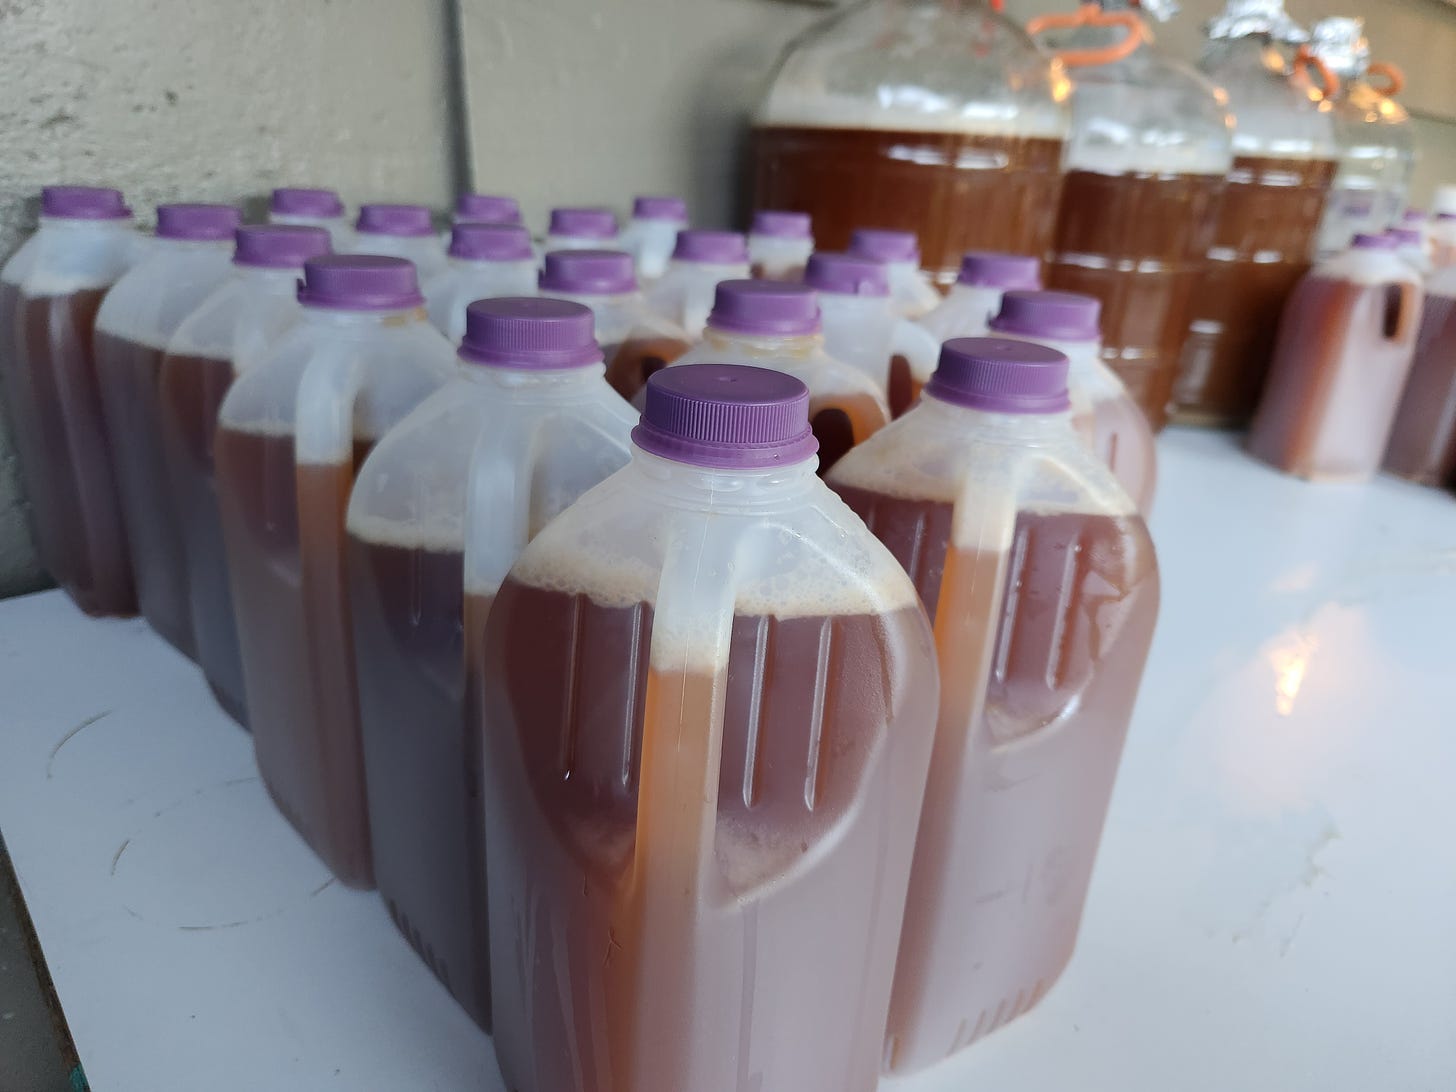 plastic jugs of cider with purple caps